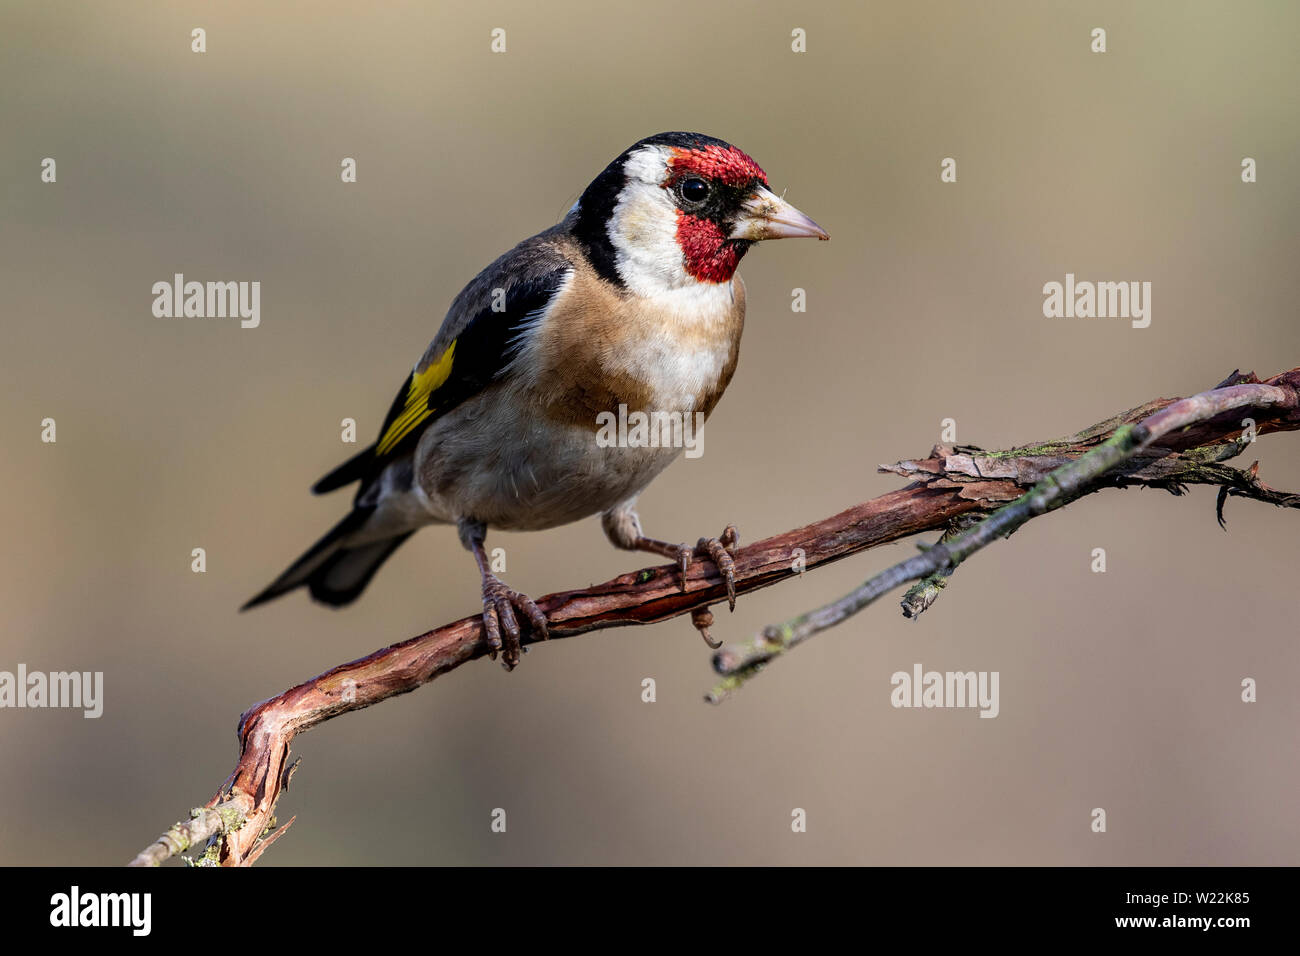 Colorful Goldfinch, (Carduelis carduelis), perching on a tree. Nice detail of the eye and feathers. Stock Photo